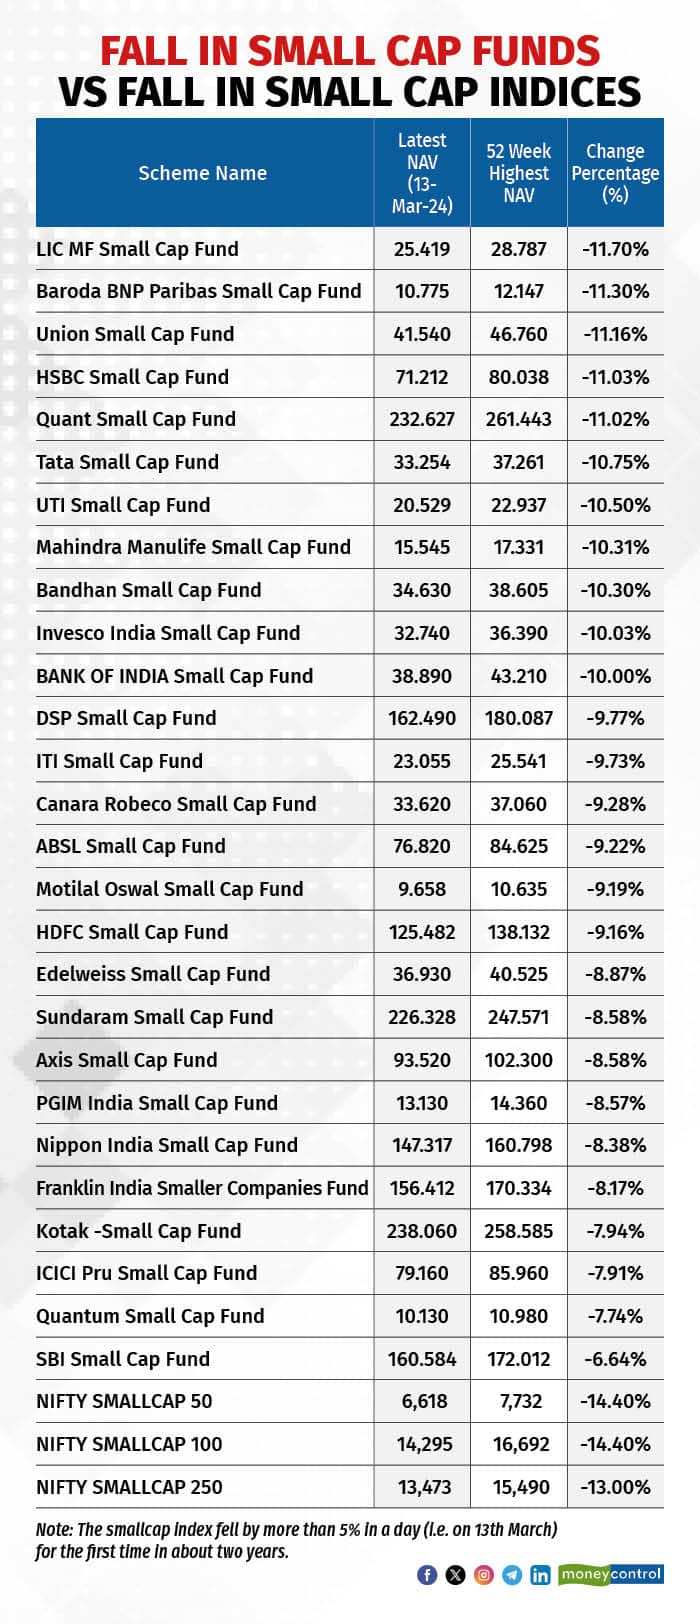 Fall in small cap funds